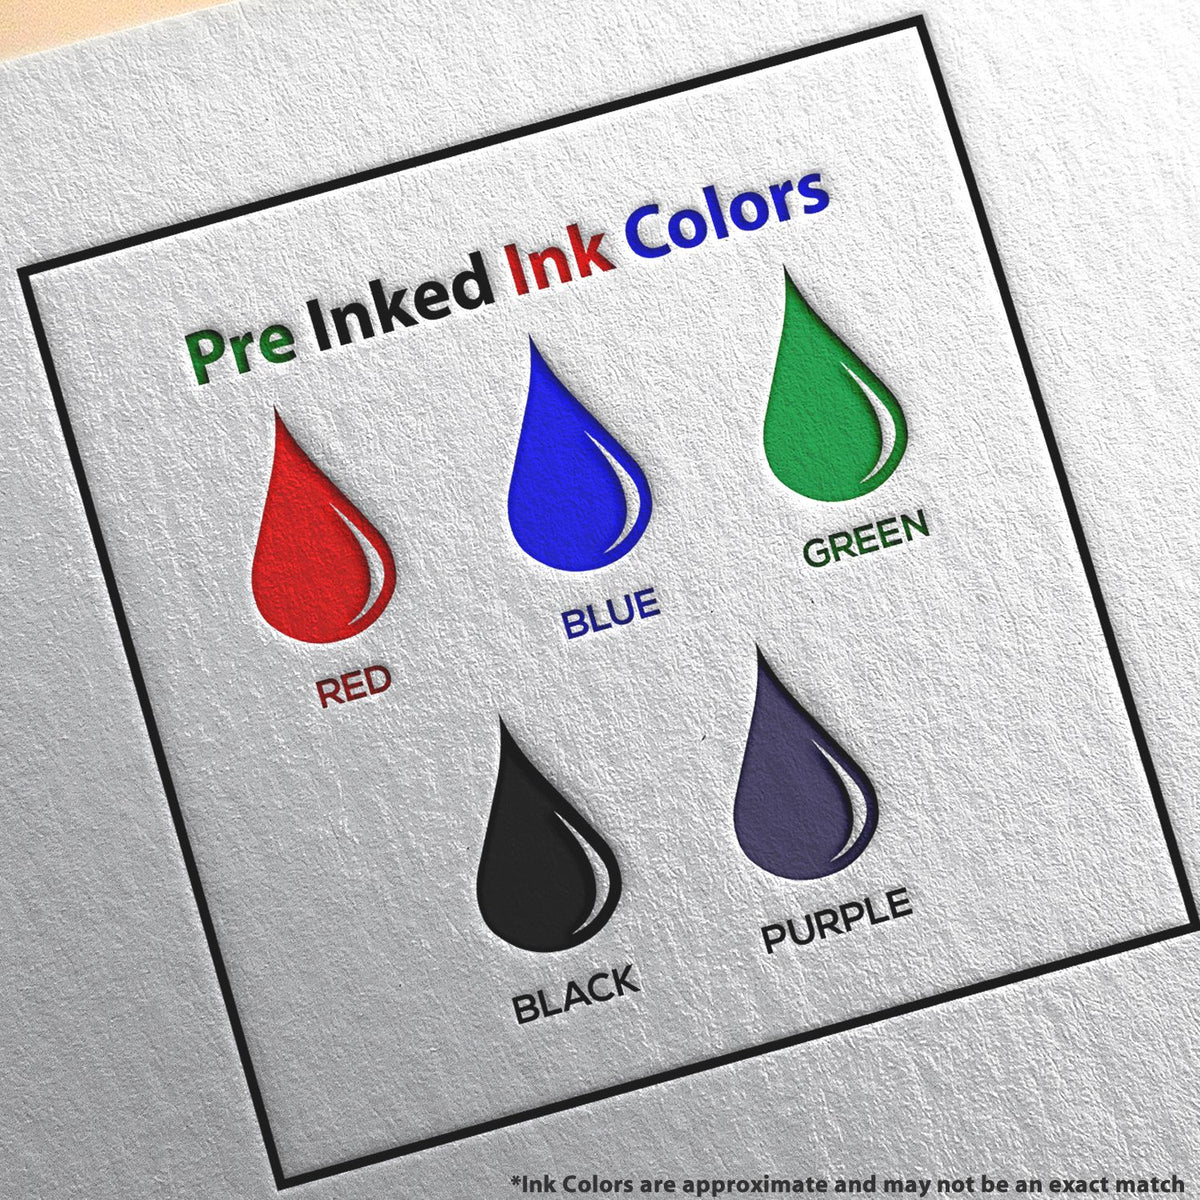 A picture showing the different ink colors or hues available for the Slim Pre-Inked Hawaii Professional Geologist Seal Stamp